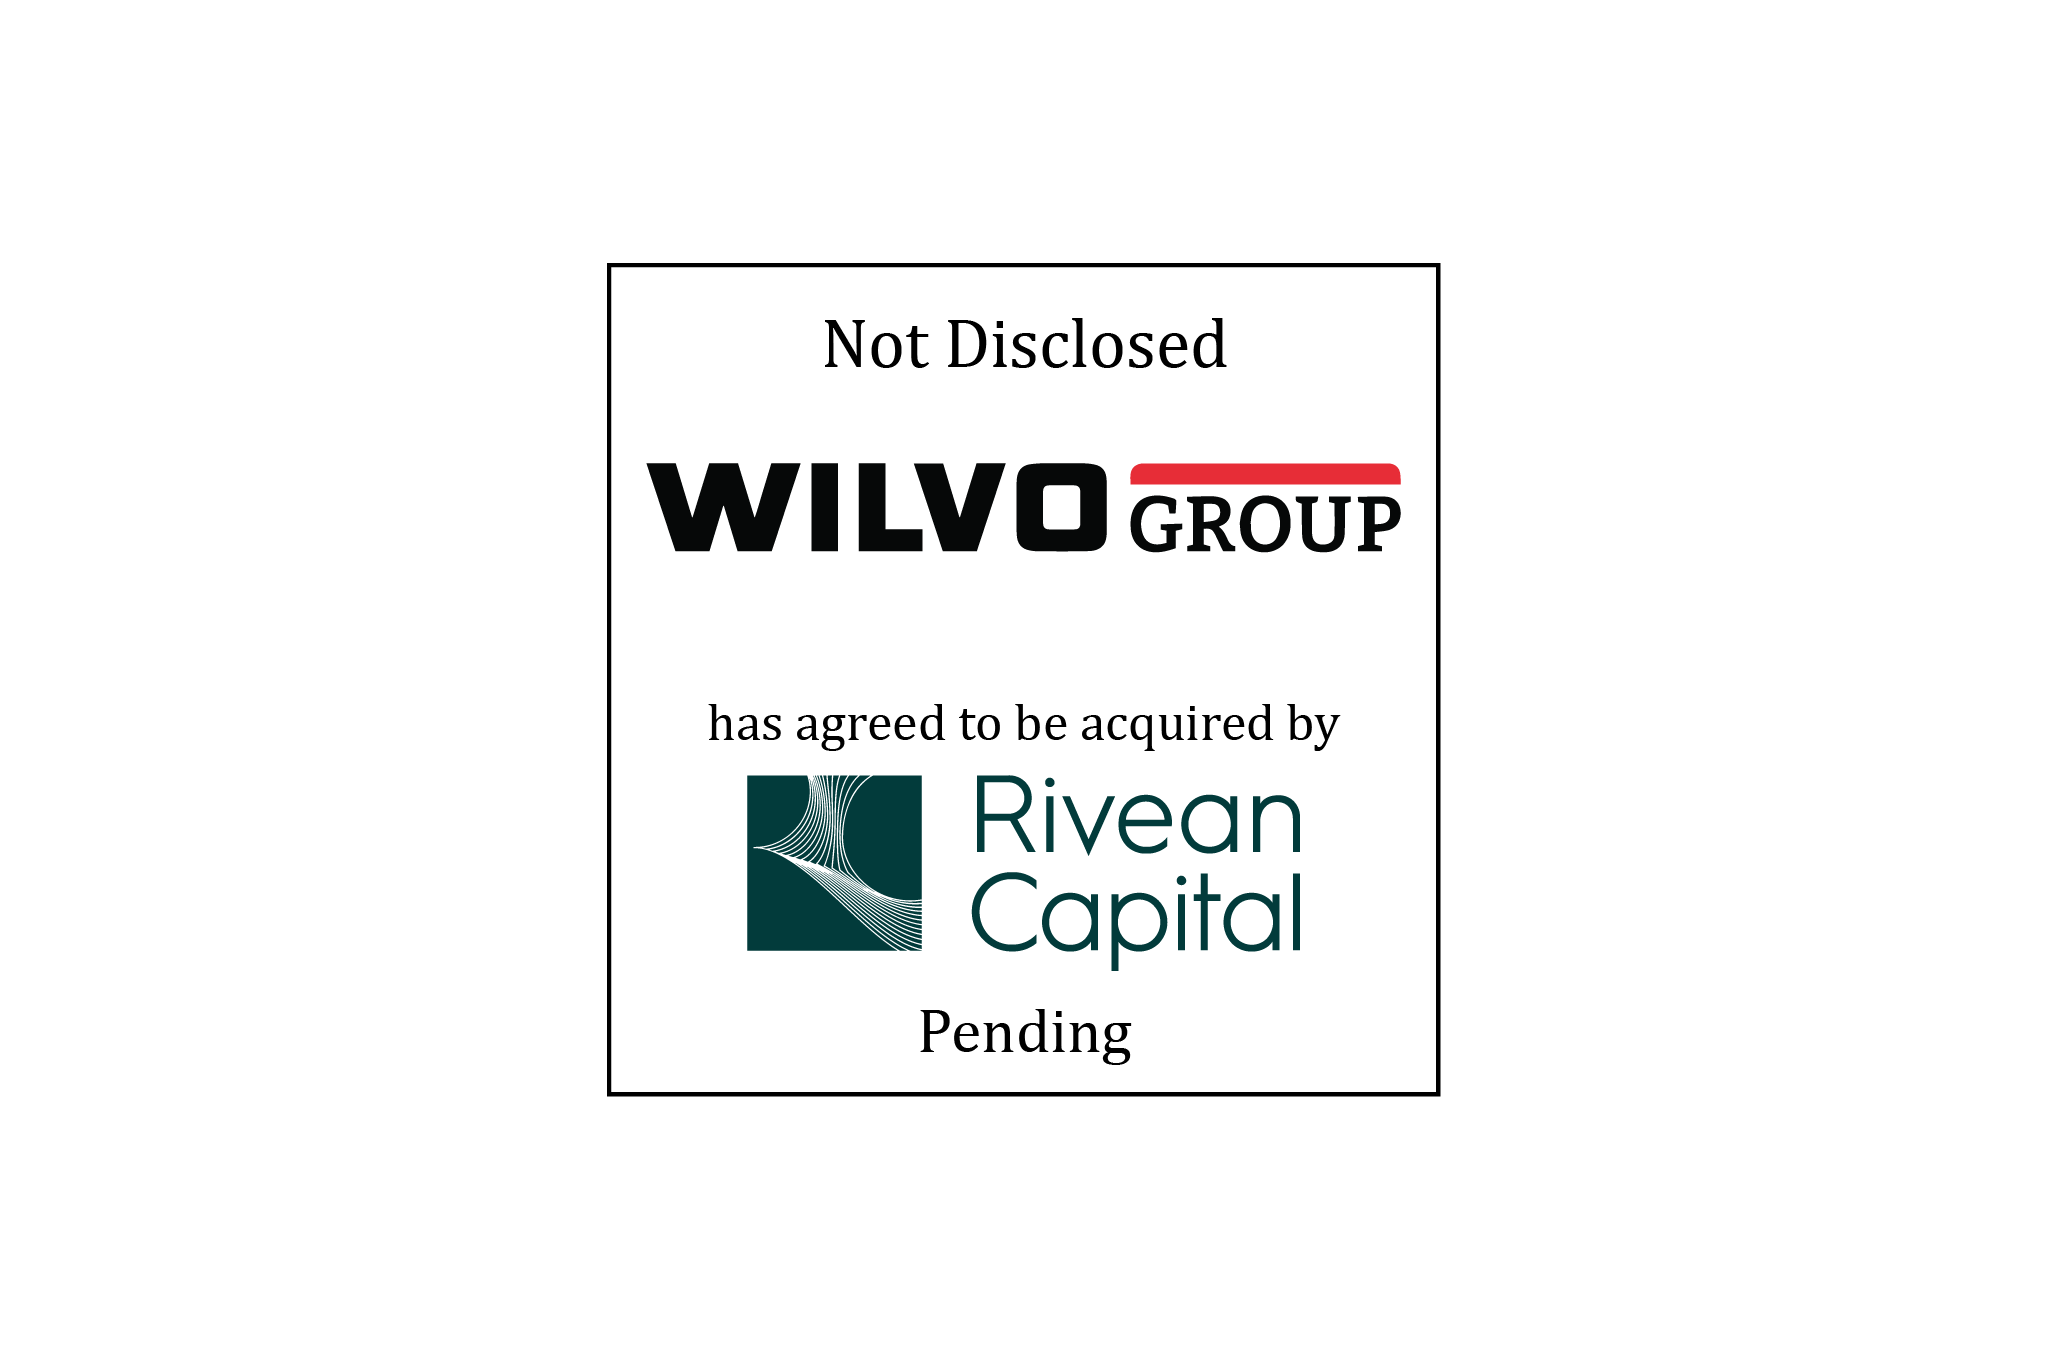 Not Disclosed | Wilvo Group (logo) has agreed to be acquired by Rivean Capital (logo) | Pending